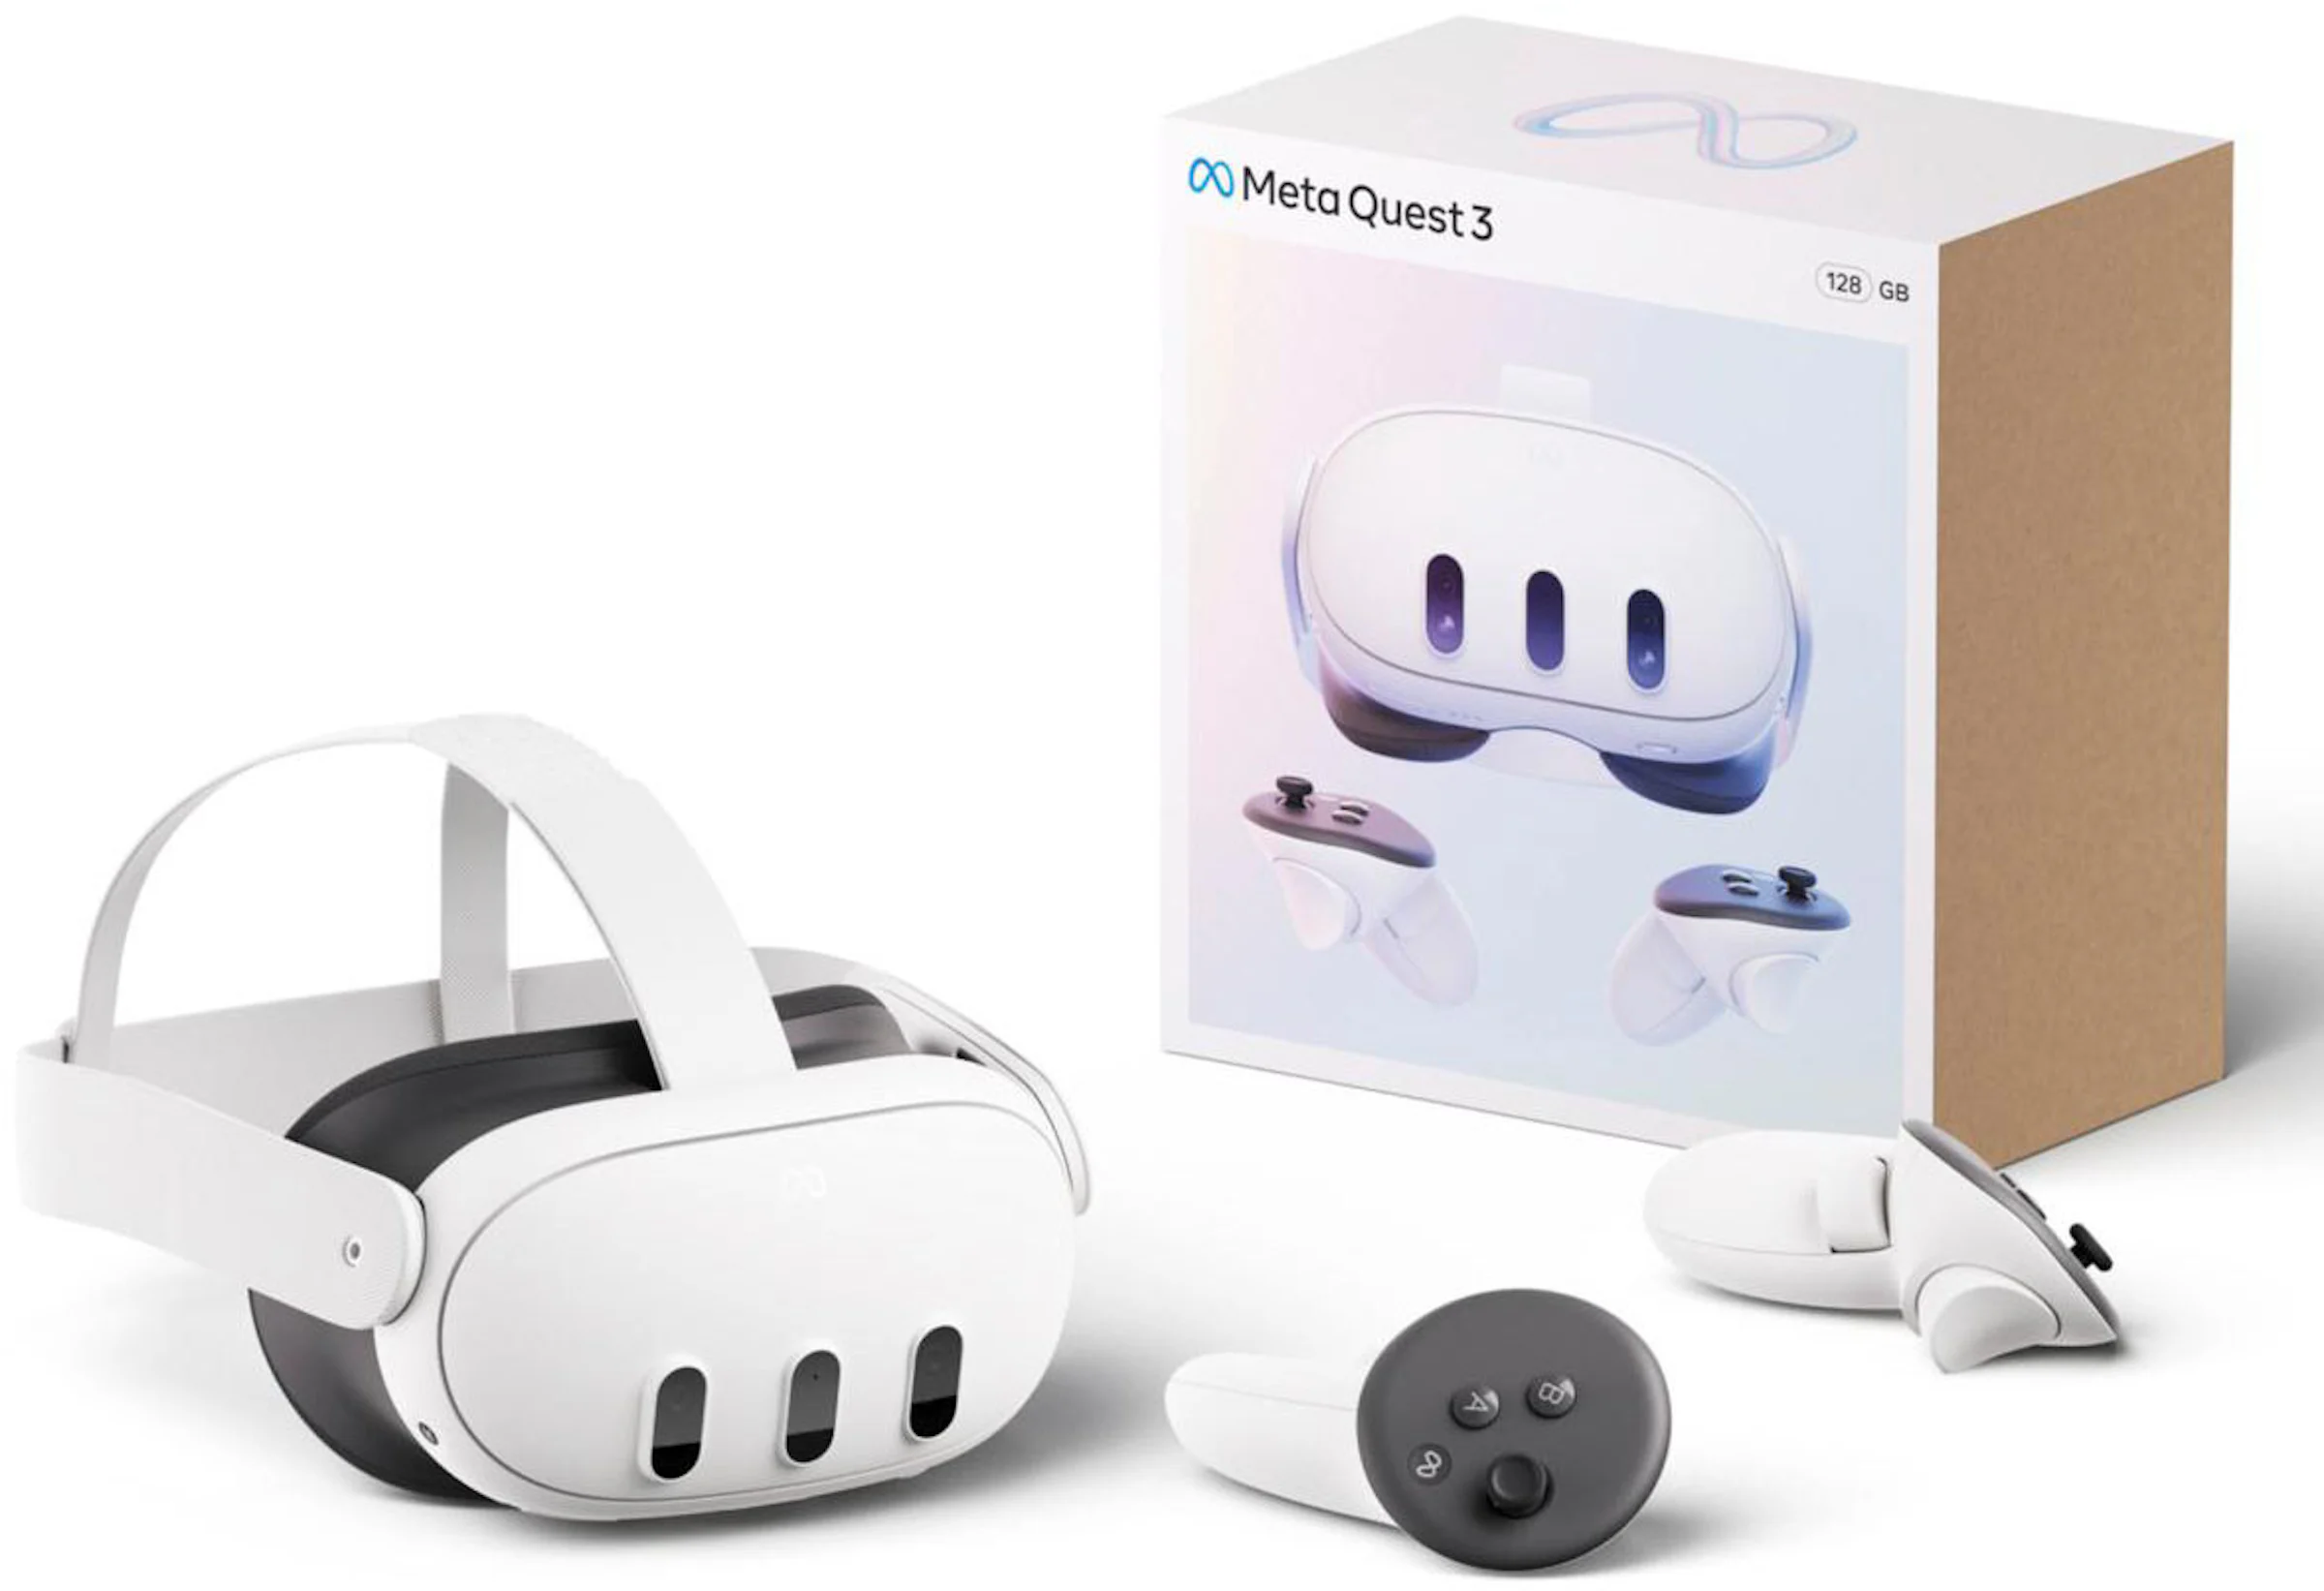 Meta Quest 3's accessories and EU prices apparently leaked : r/oculus